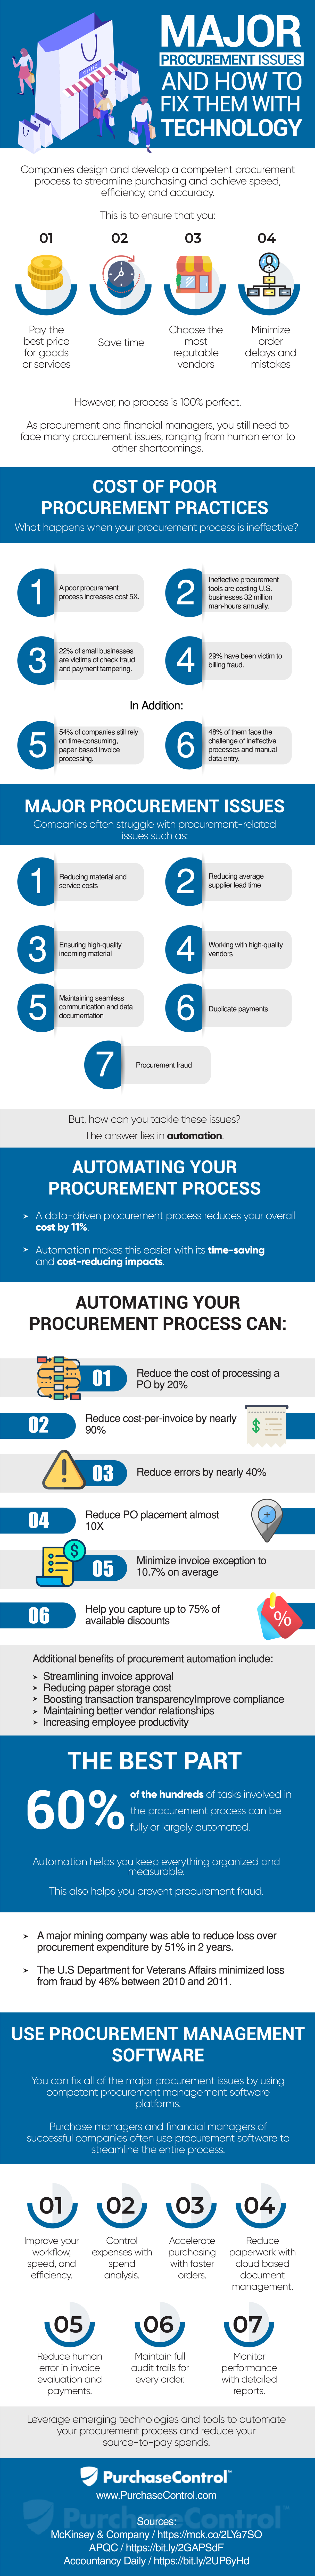 Major Procurement Issues & How to Fix Them with Technology